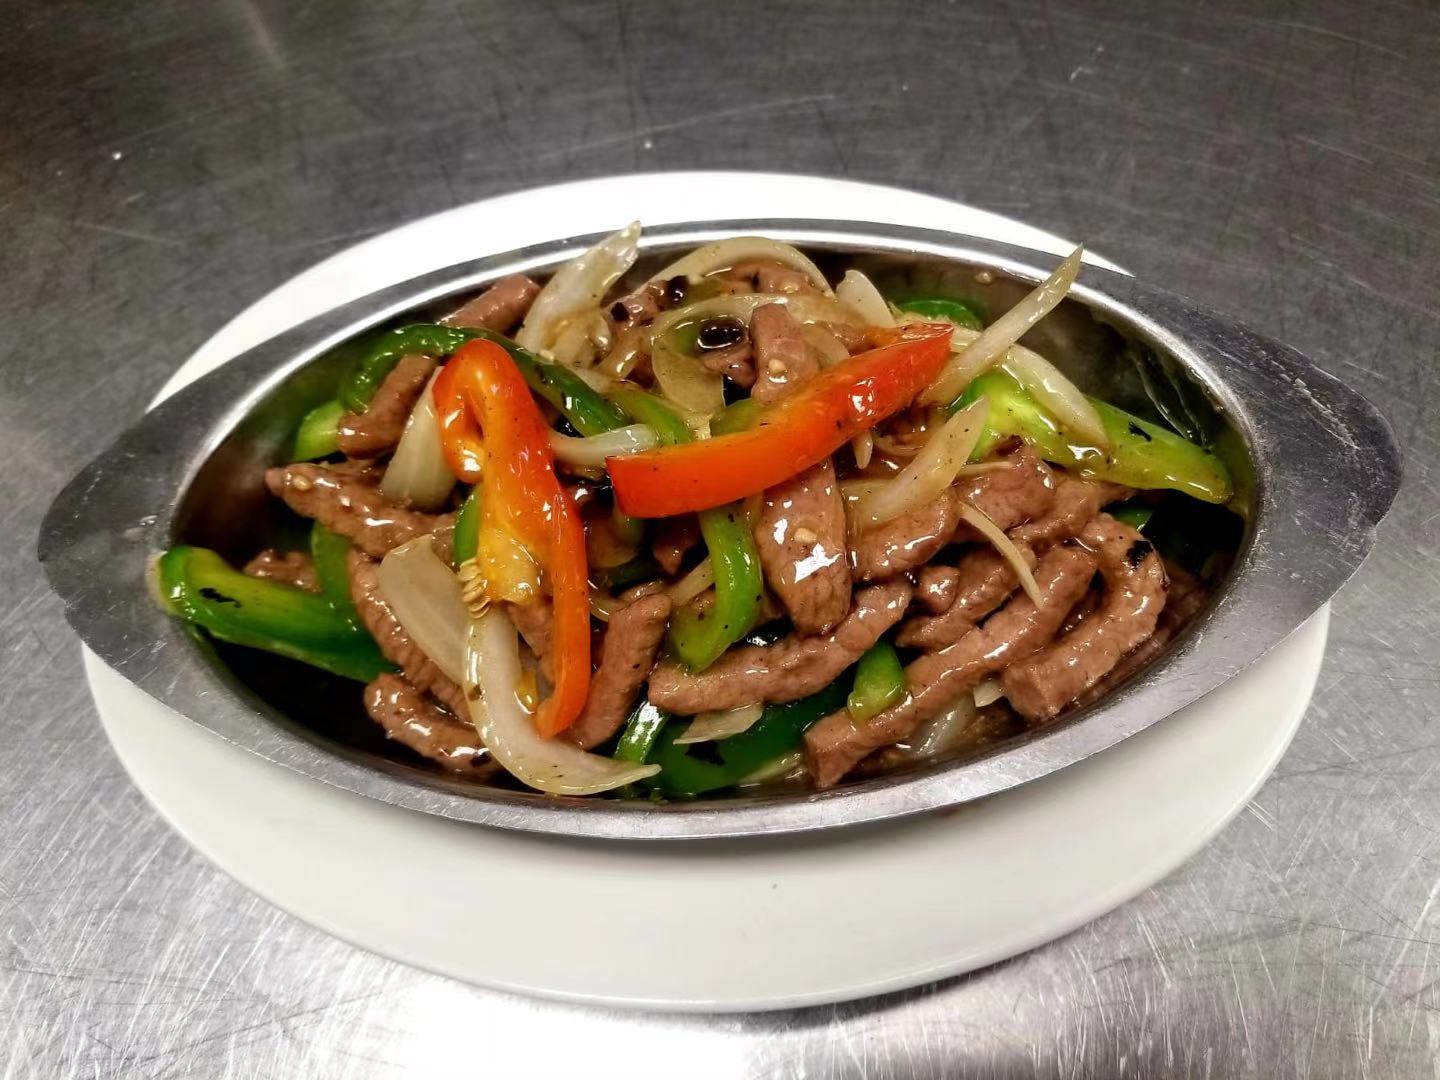 137. Sizzling Shredded Beef with Green Pepper and Black Bean